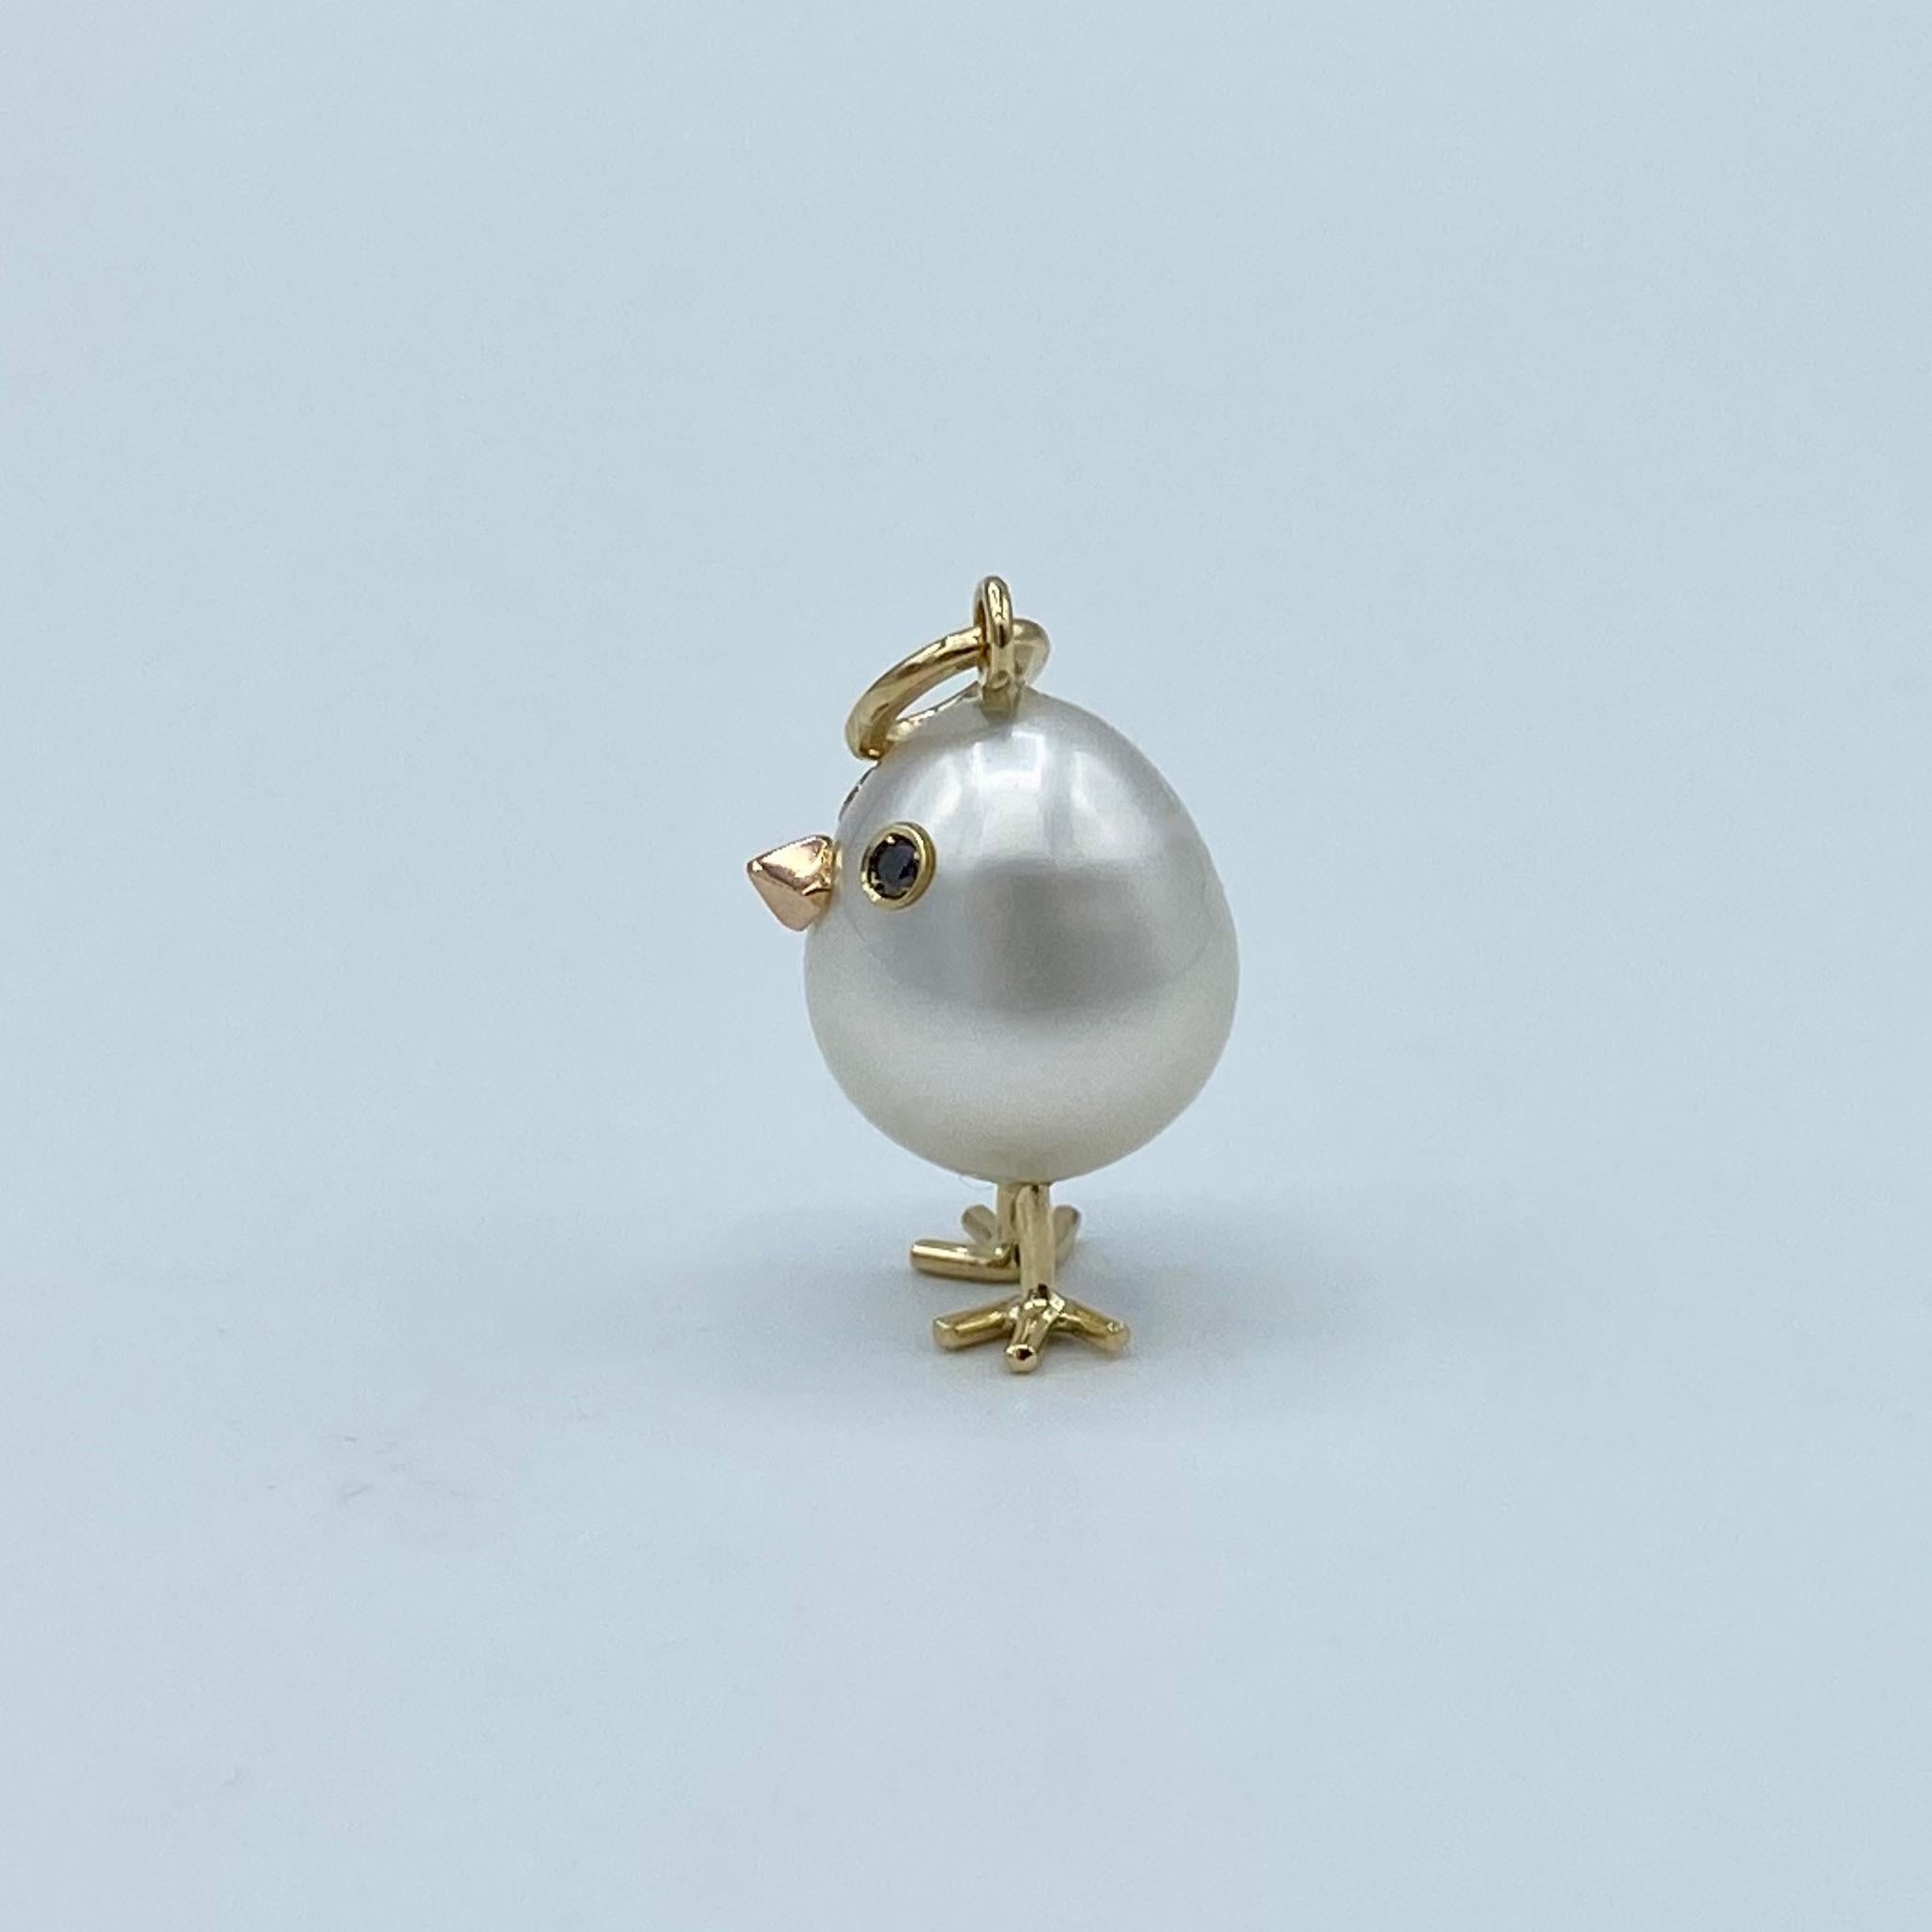 Chick Australian Pearl Diamond Yellow Red white 18 Kt Gold Pendant or Necklace
A oval shape Australian pearl has been carefully crafted to make a chick. He has his two legs, two eyes encrusted with two black diamonds and his beak. 
The gold is